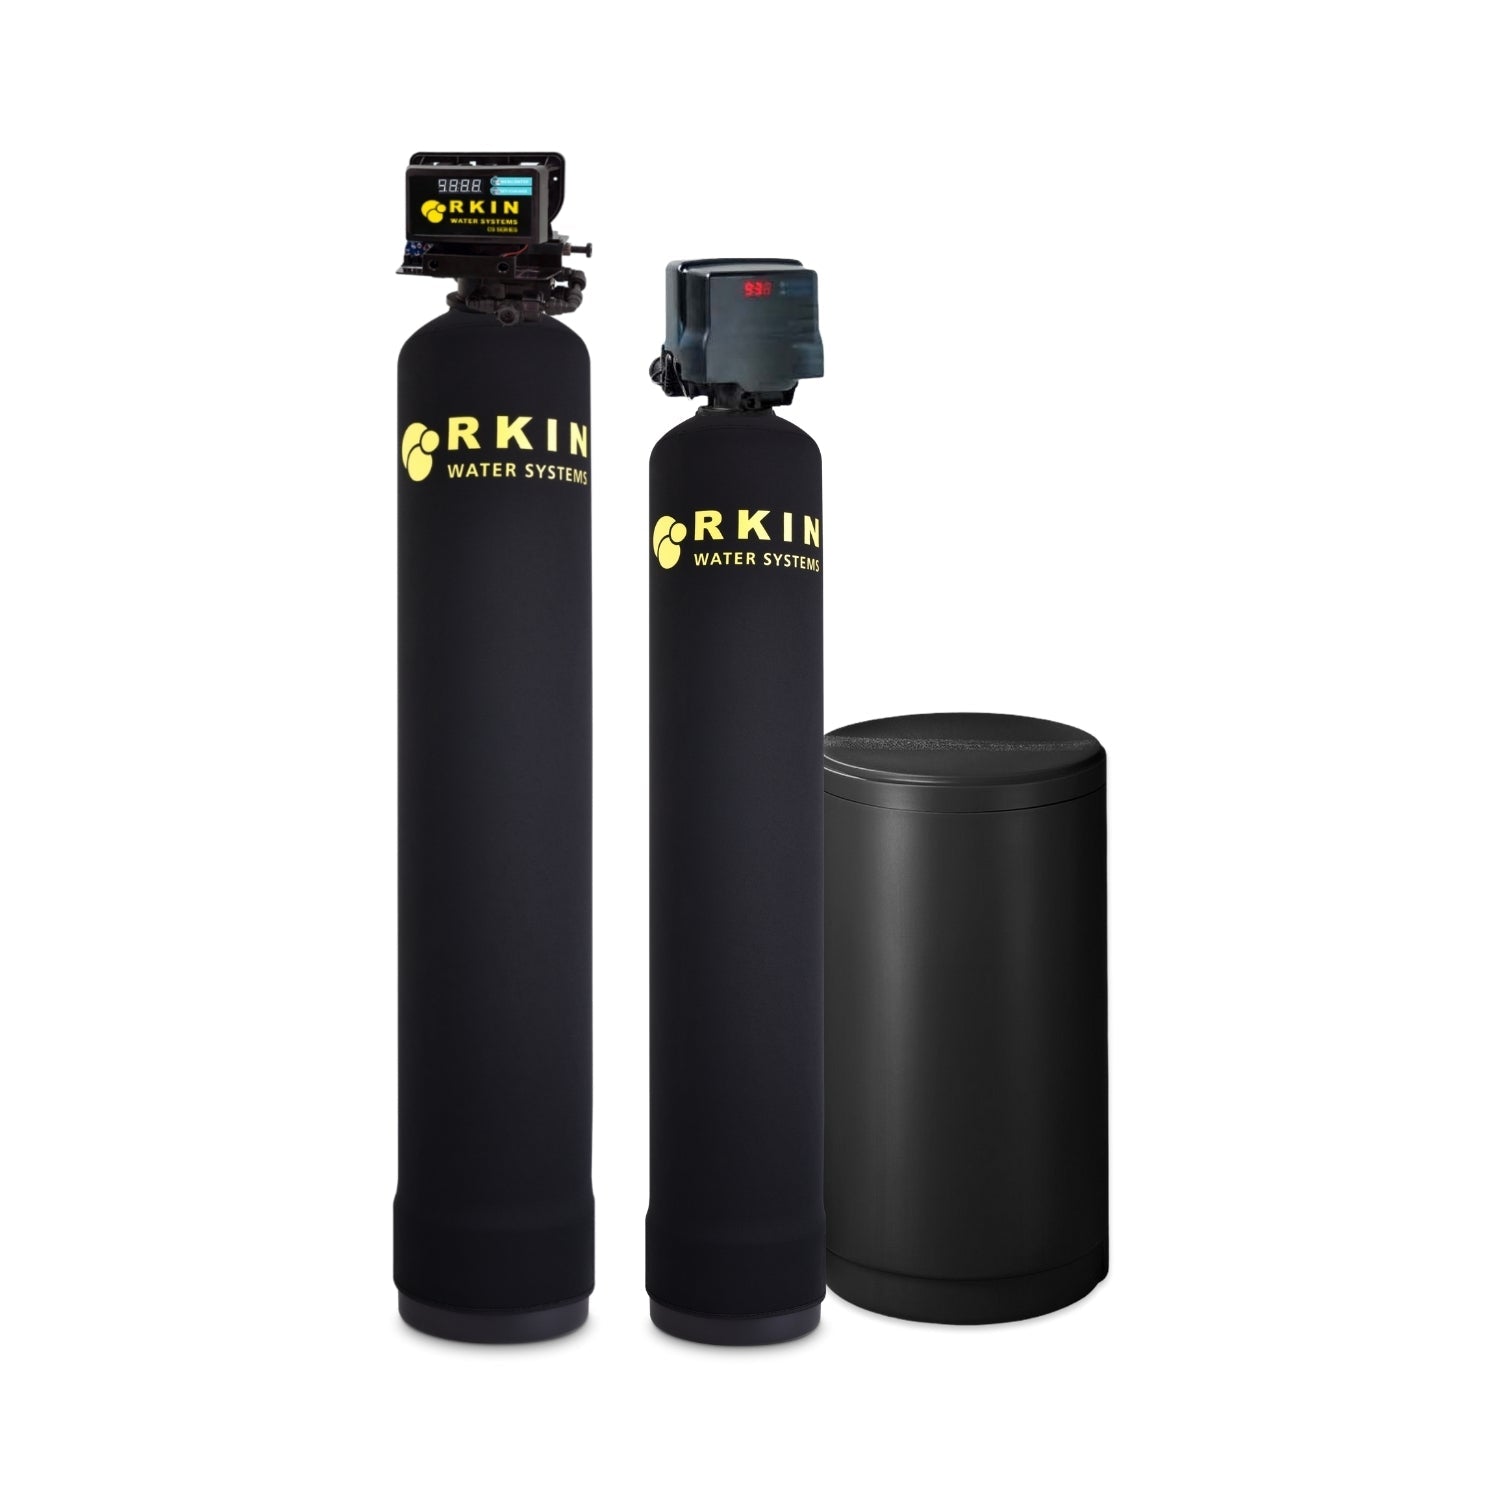 Salt-Based Water Softener and Filter from RKIN